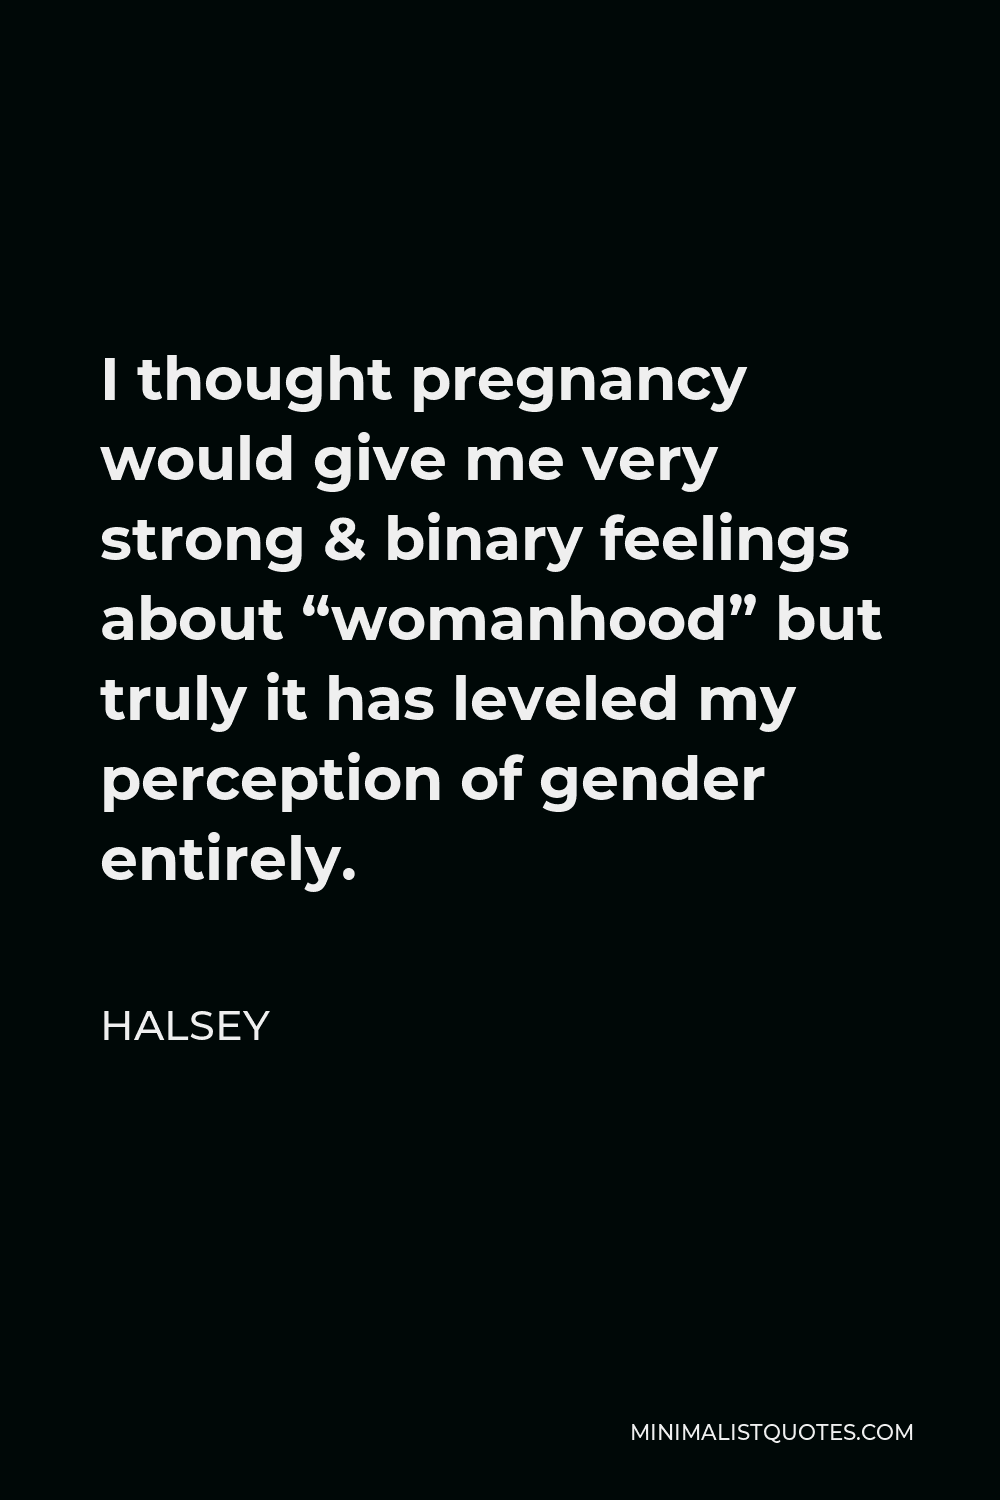 Halsey Quote - I thought pregnancy would give me very strong & binary feelings about “womanhood” but truly it has leveled my perception of gender entirely.